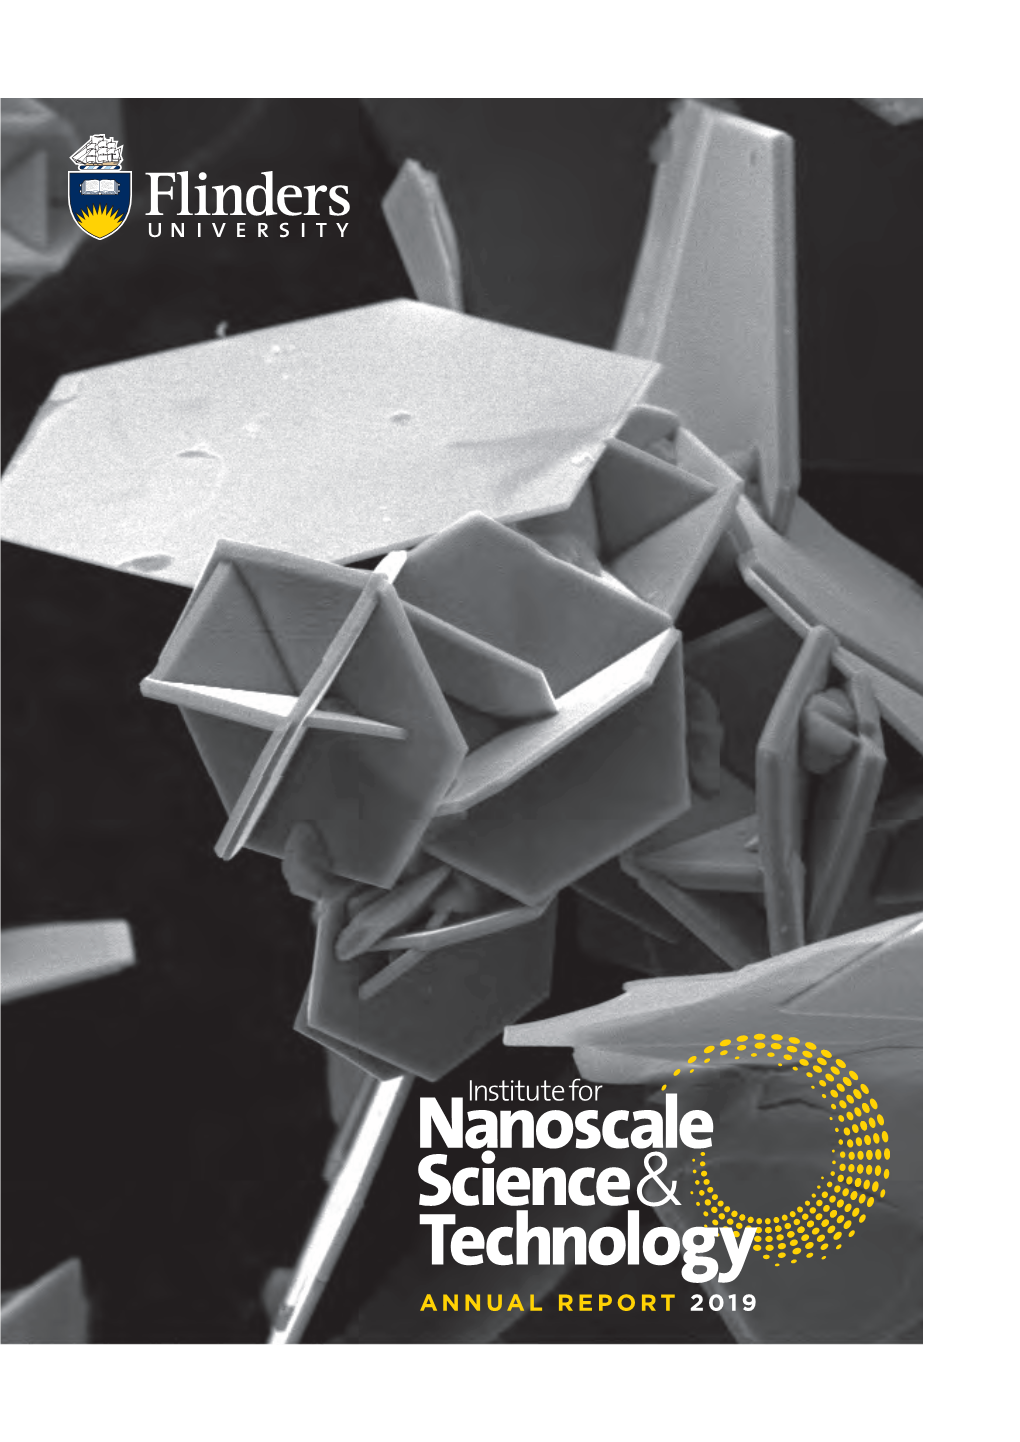 Institute for Nanoscale and Technology